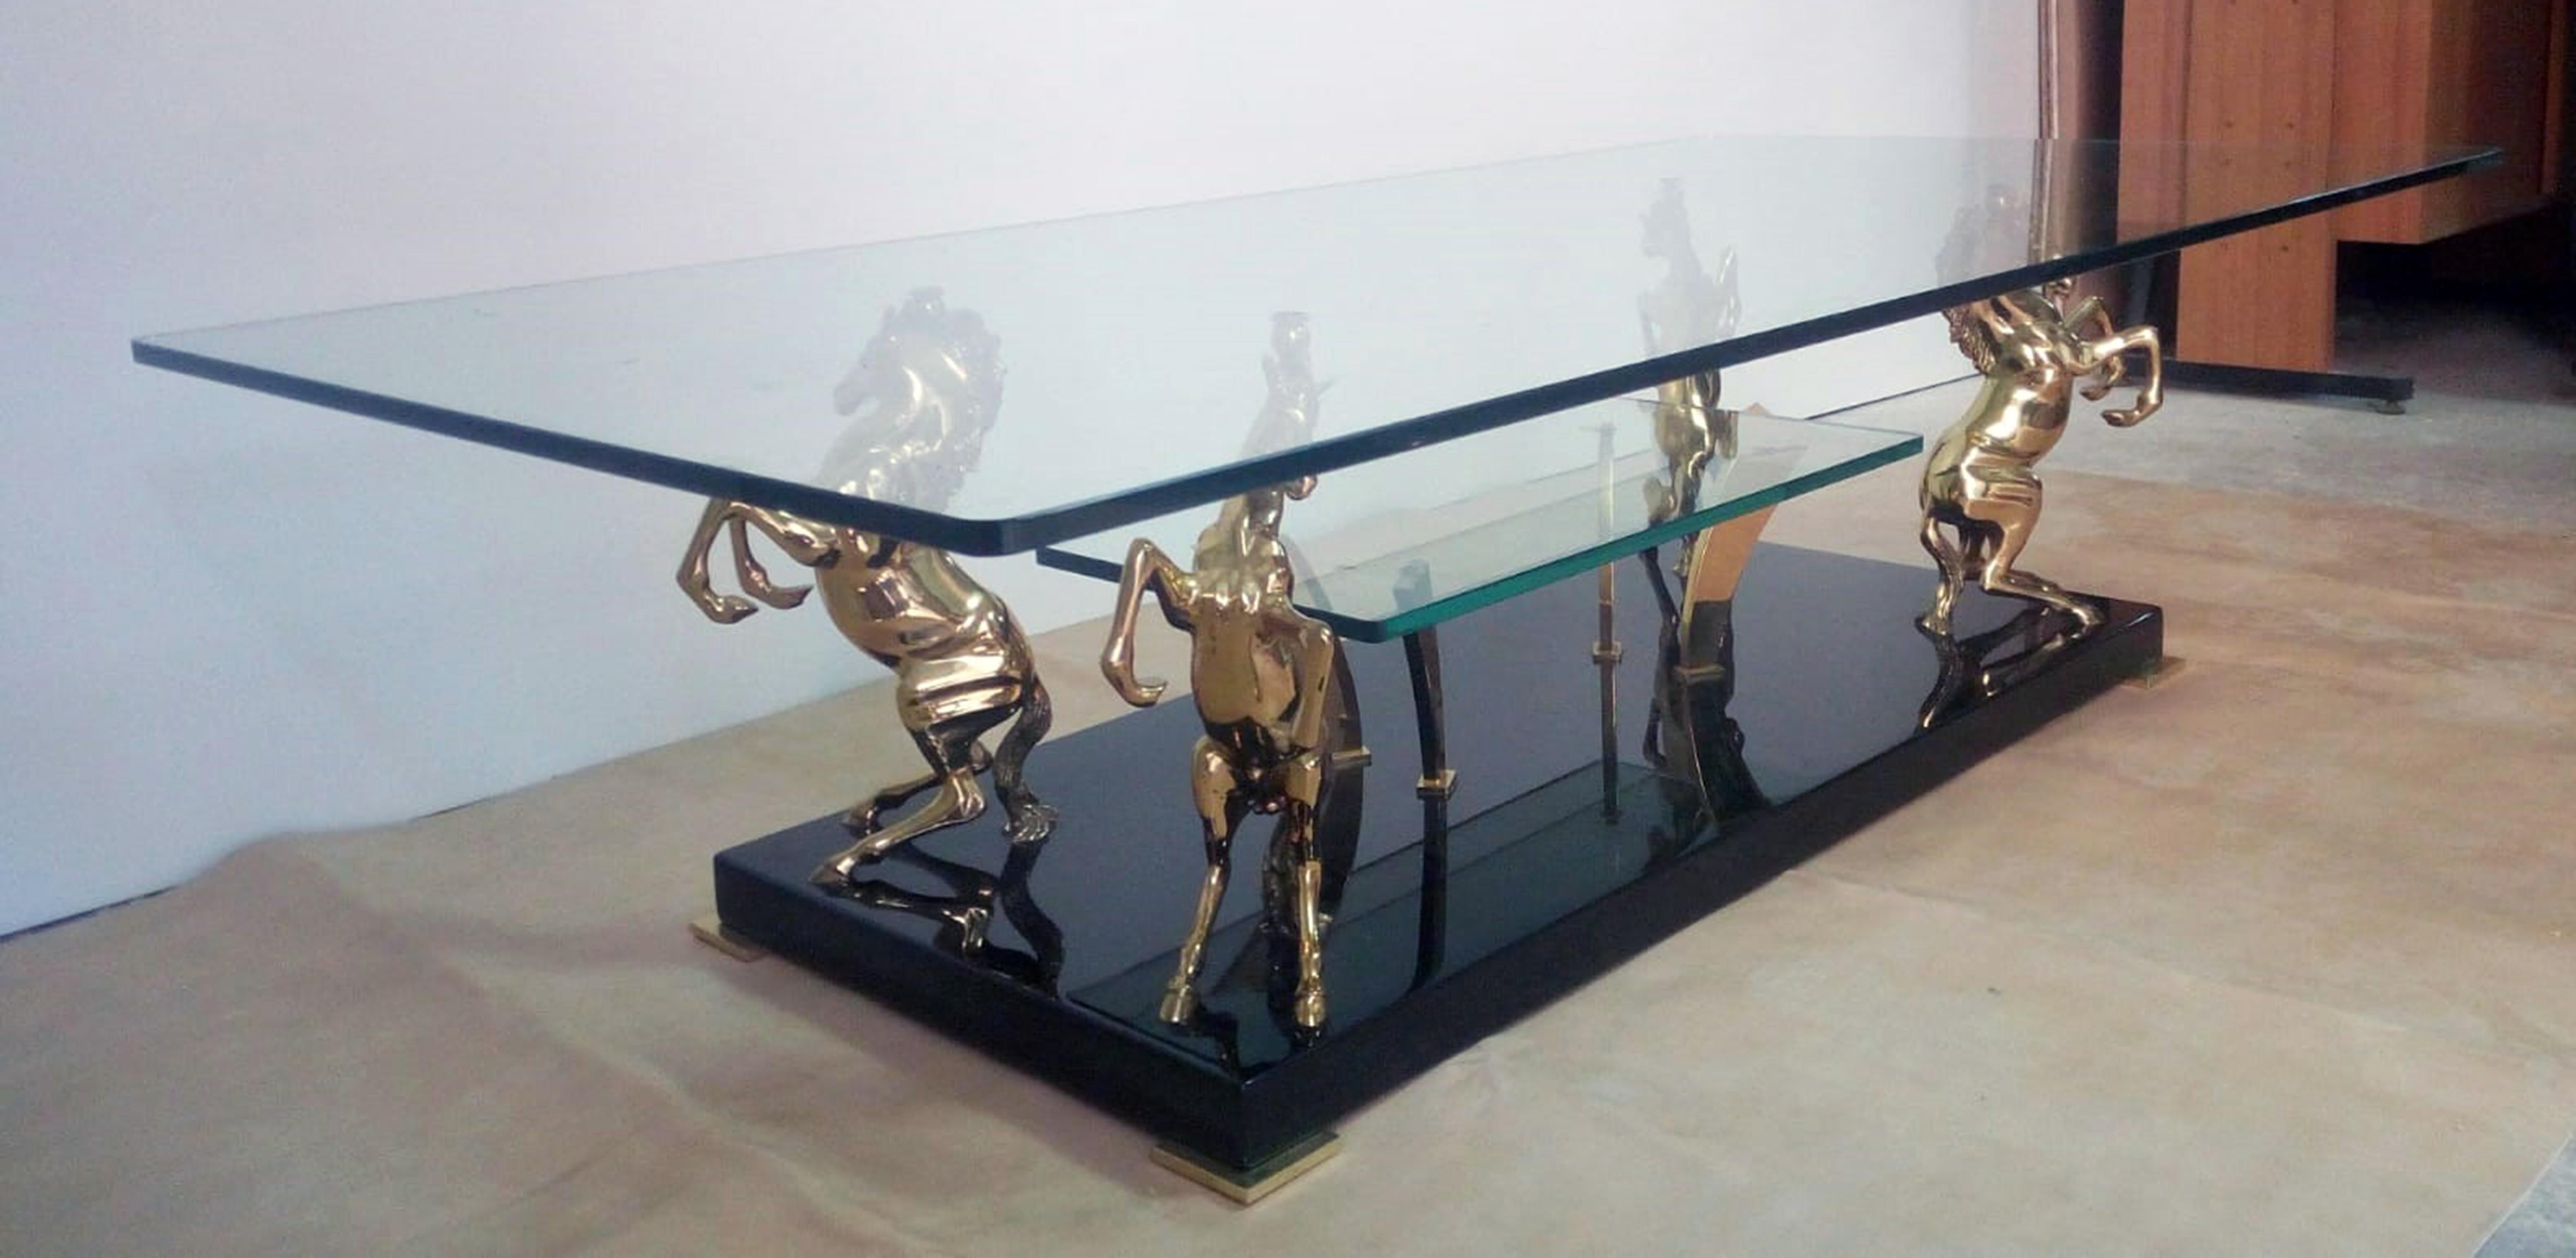 This French coffee table is produced in the 1970s by the Maison Charles. The table has a two-level brass structure, below a smaller crystal and a larger crystal top with grinding. The four polished brass horses rest on a polished ebonized wooden